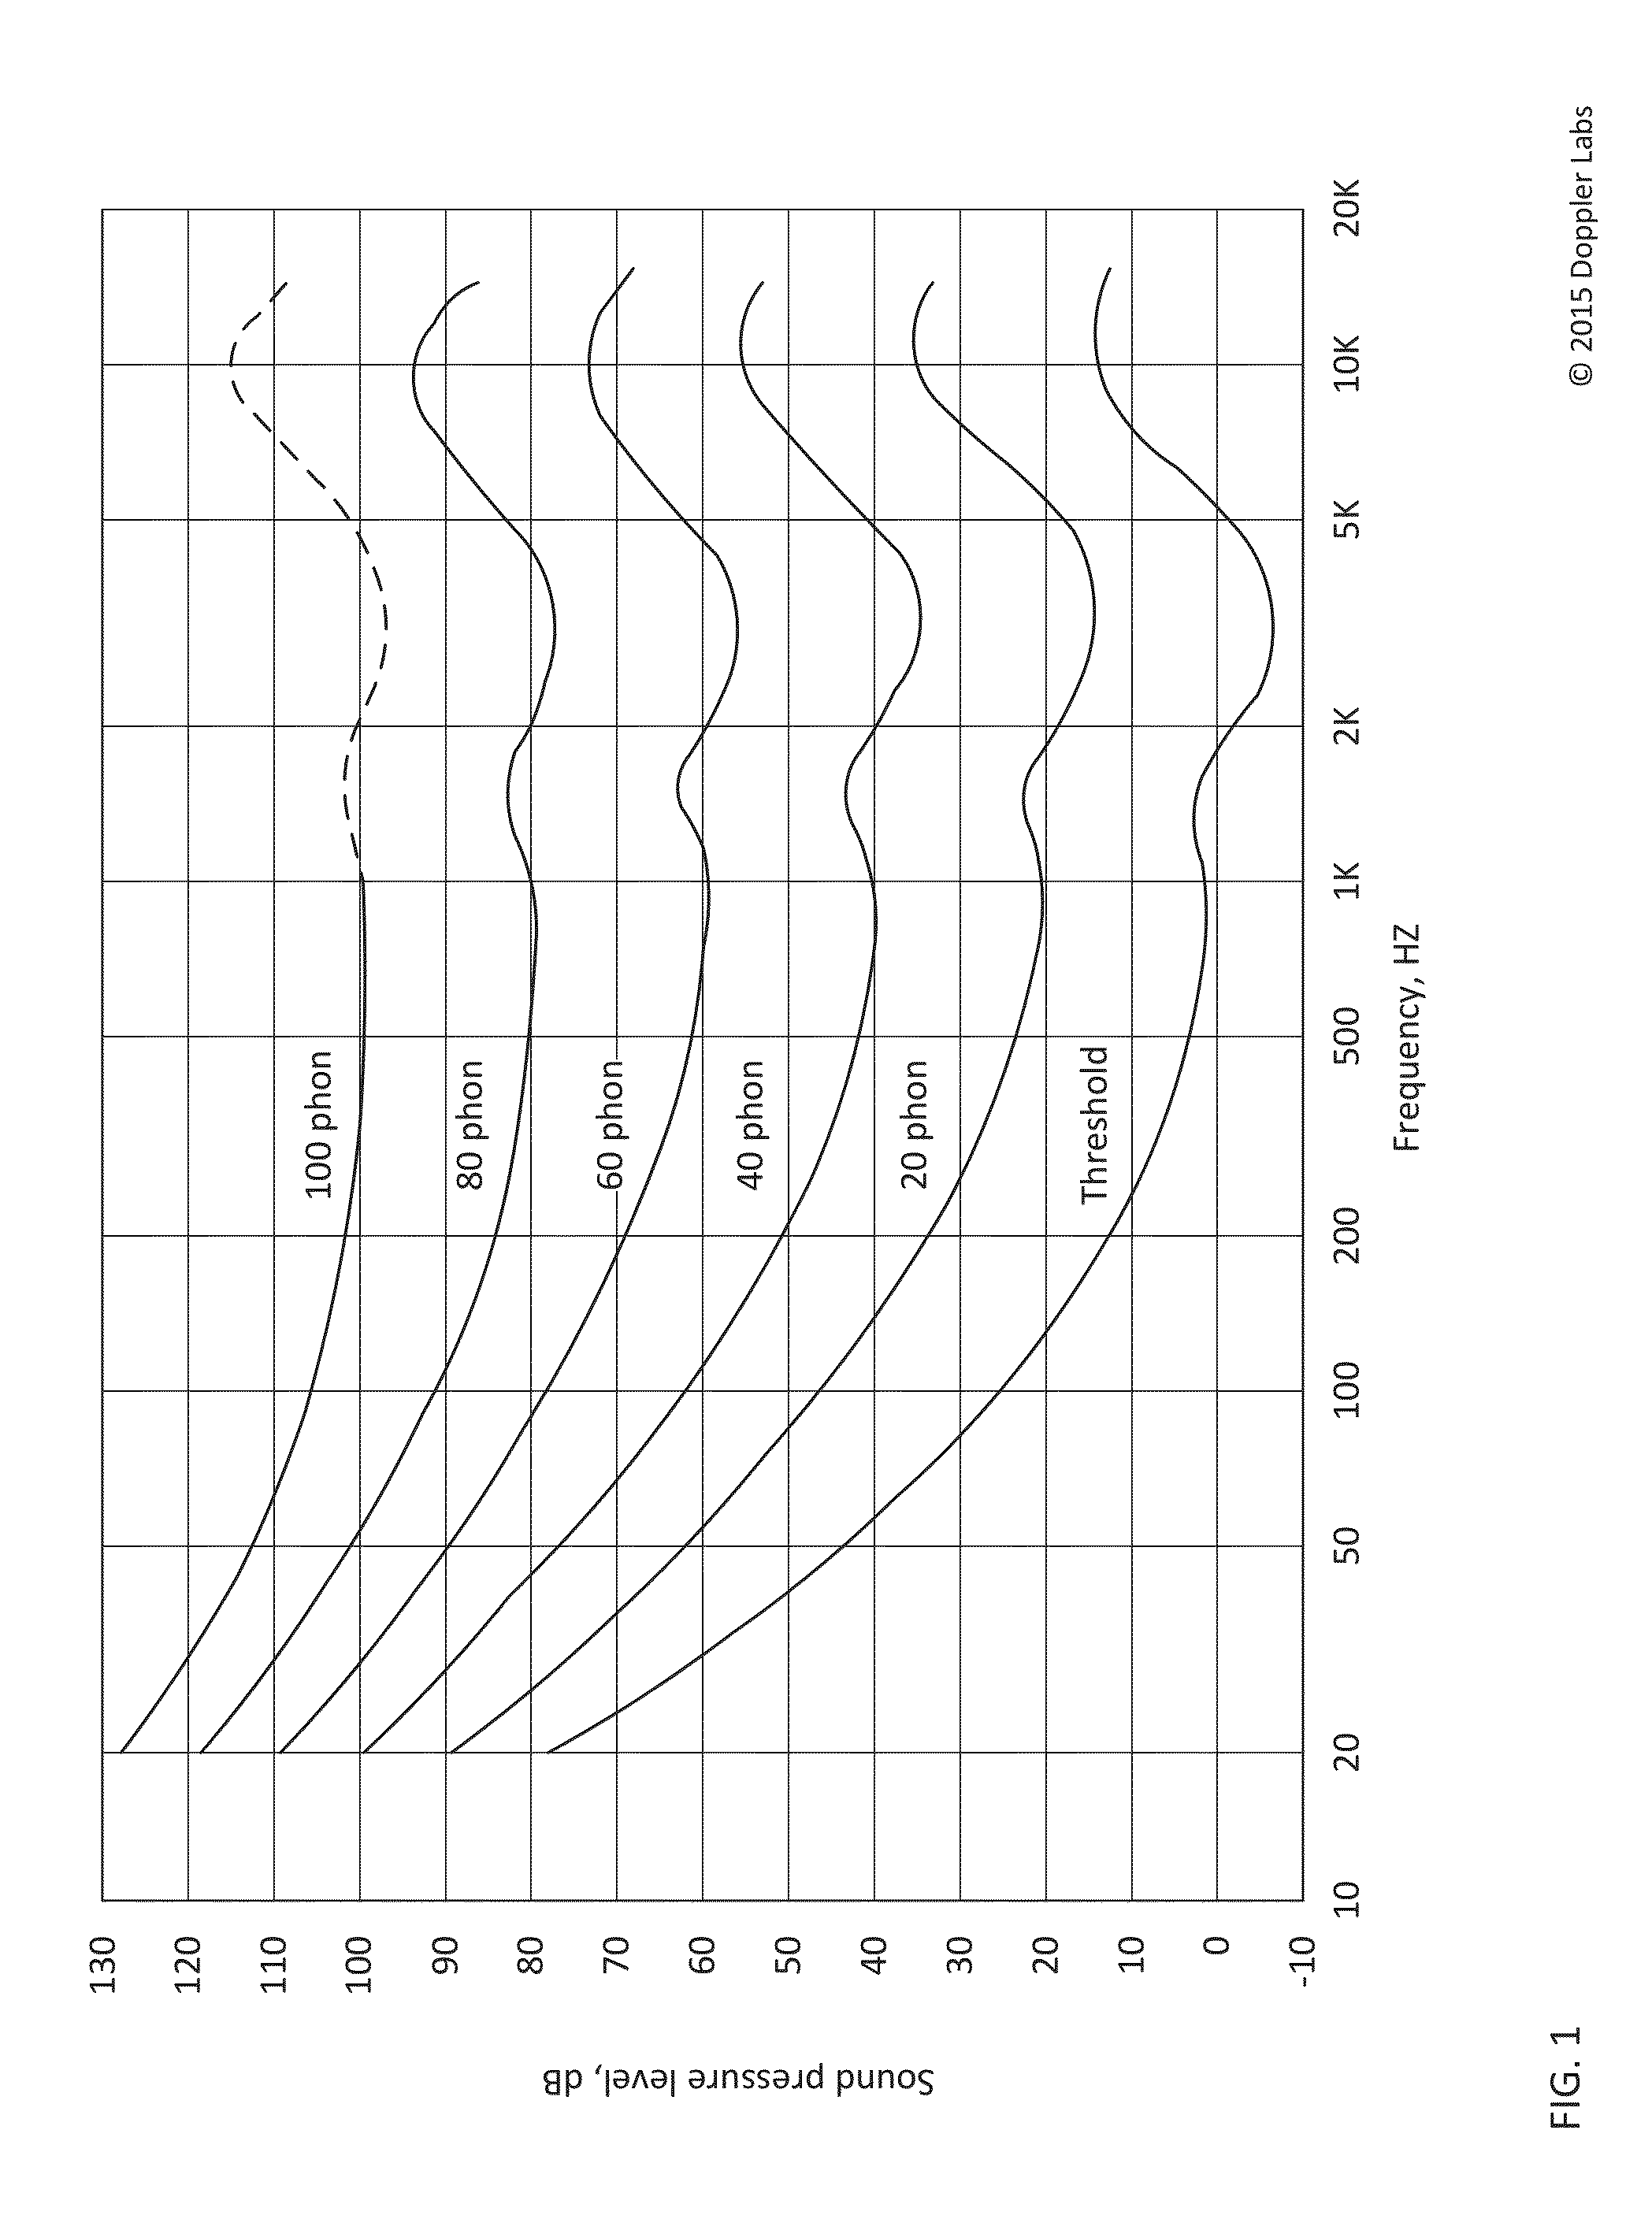 Active acoustic filter with location-based filter characteristics